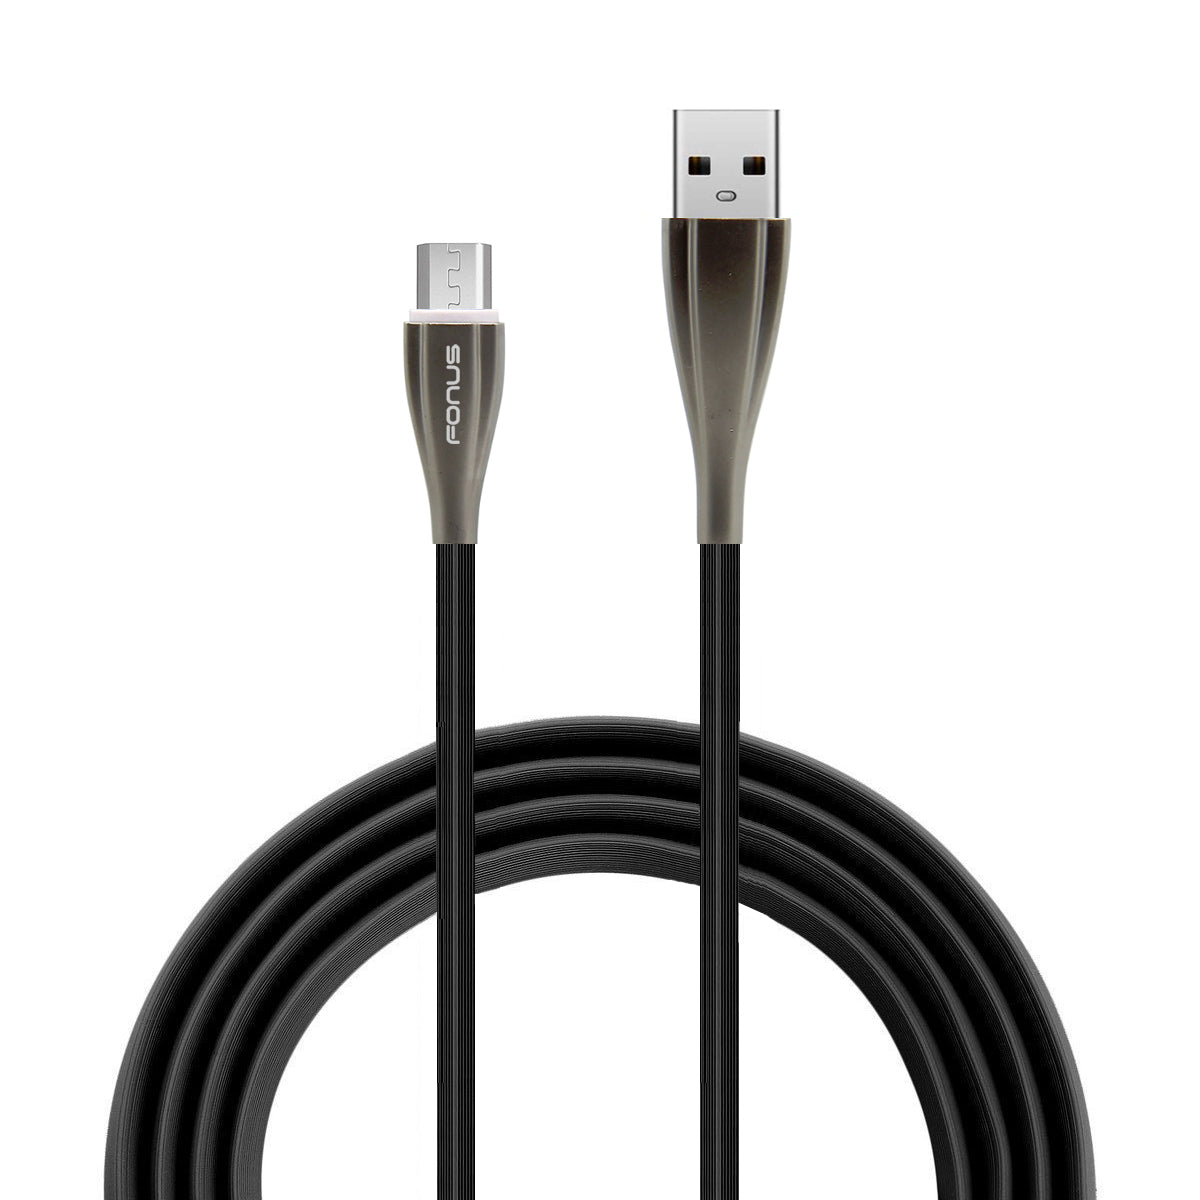 10ft USB Cable Charger Cord Power Wire MicroUSB Long